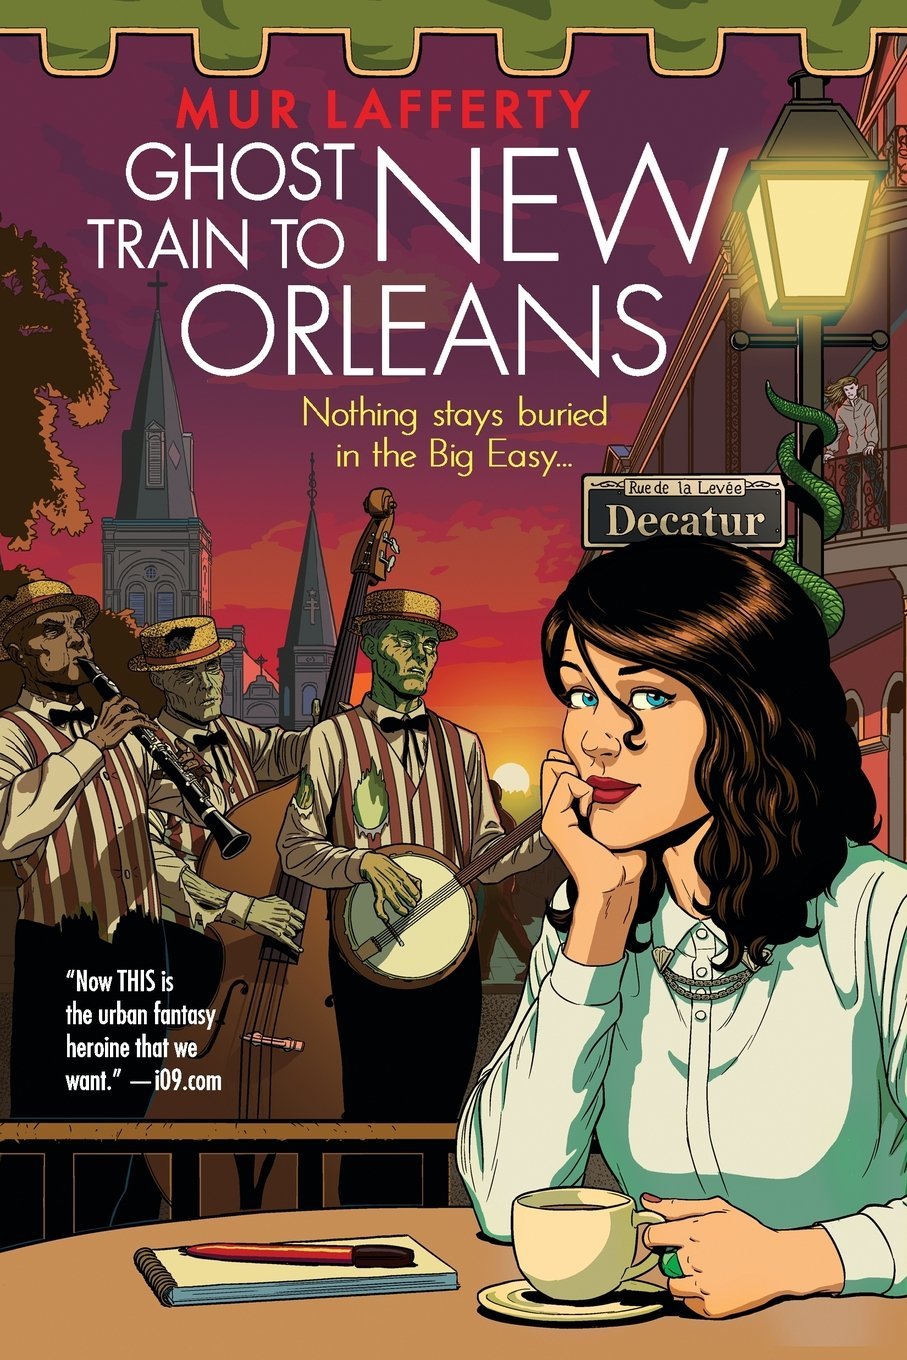 Book Review: “Ghost Train To New Orleans” (Shambling Guides #2) by Mur Lafferty